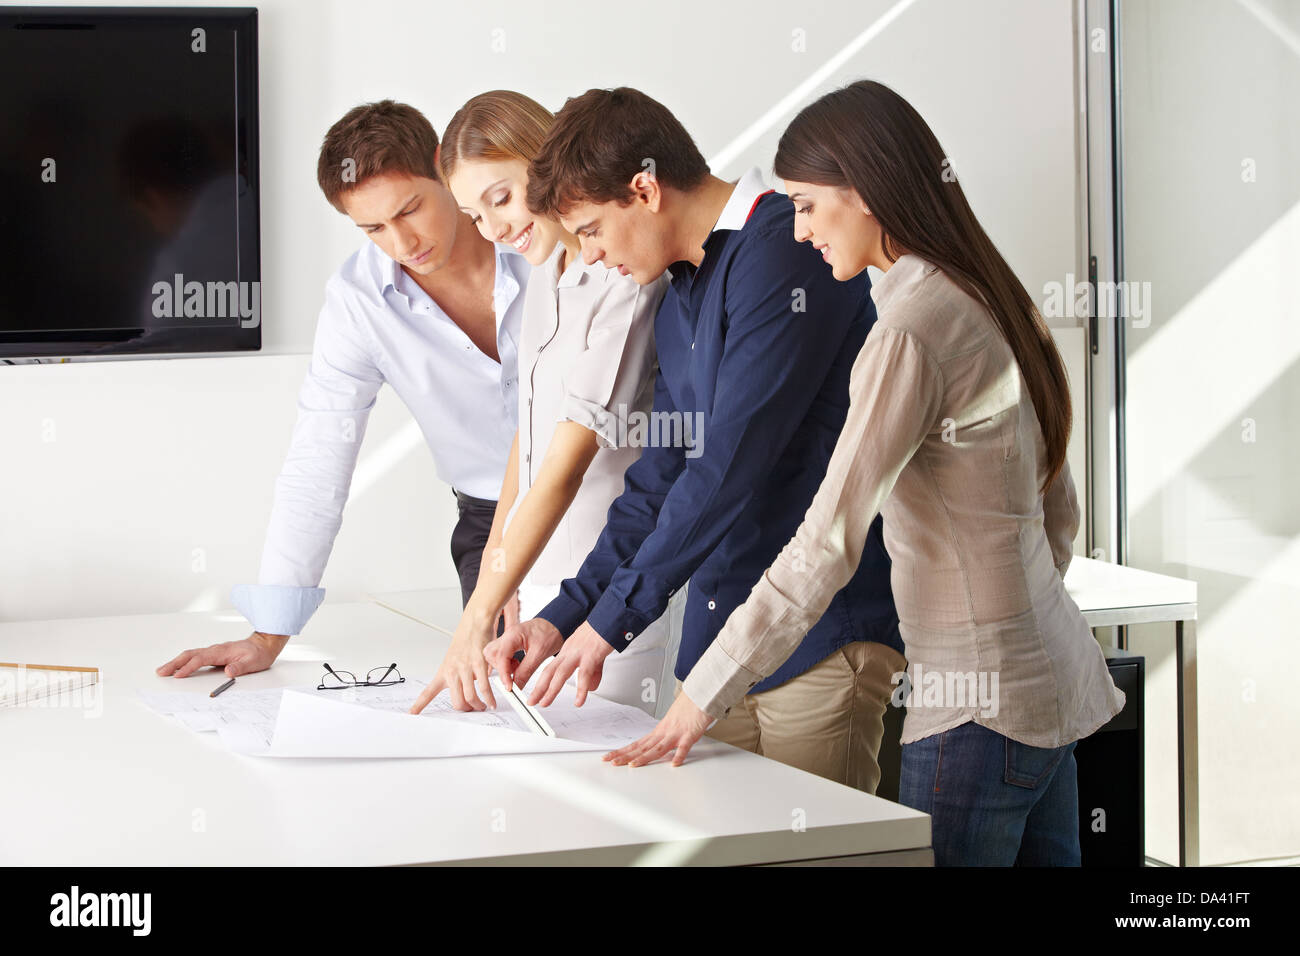 Team of architects working together on building plan in an office Stock Photo